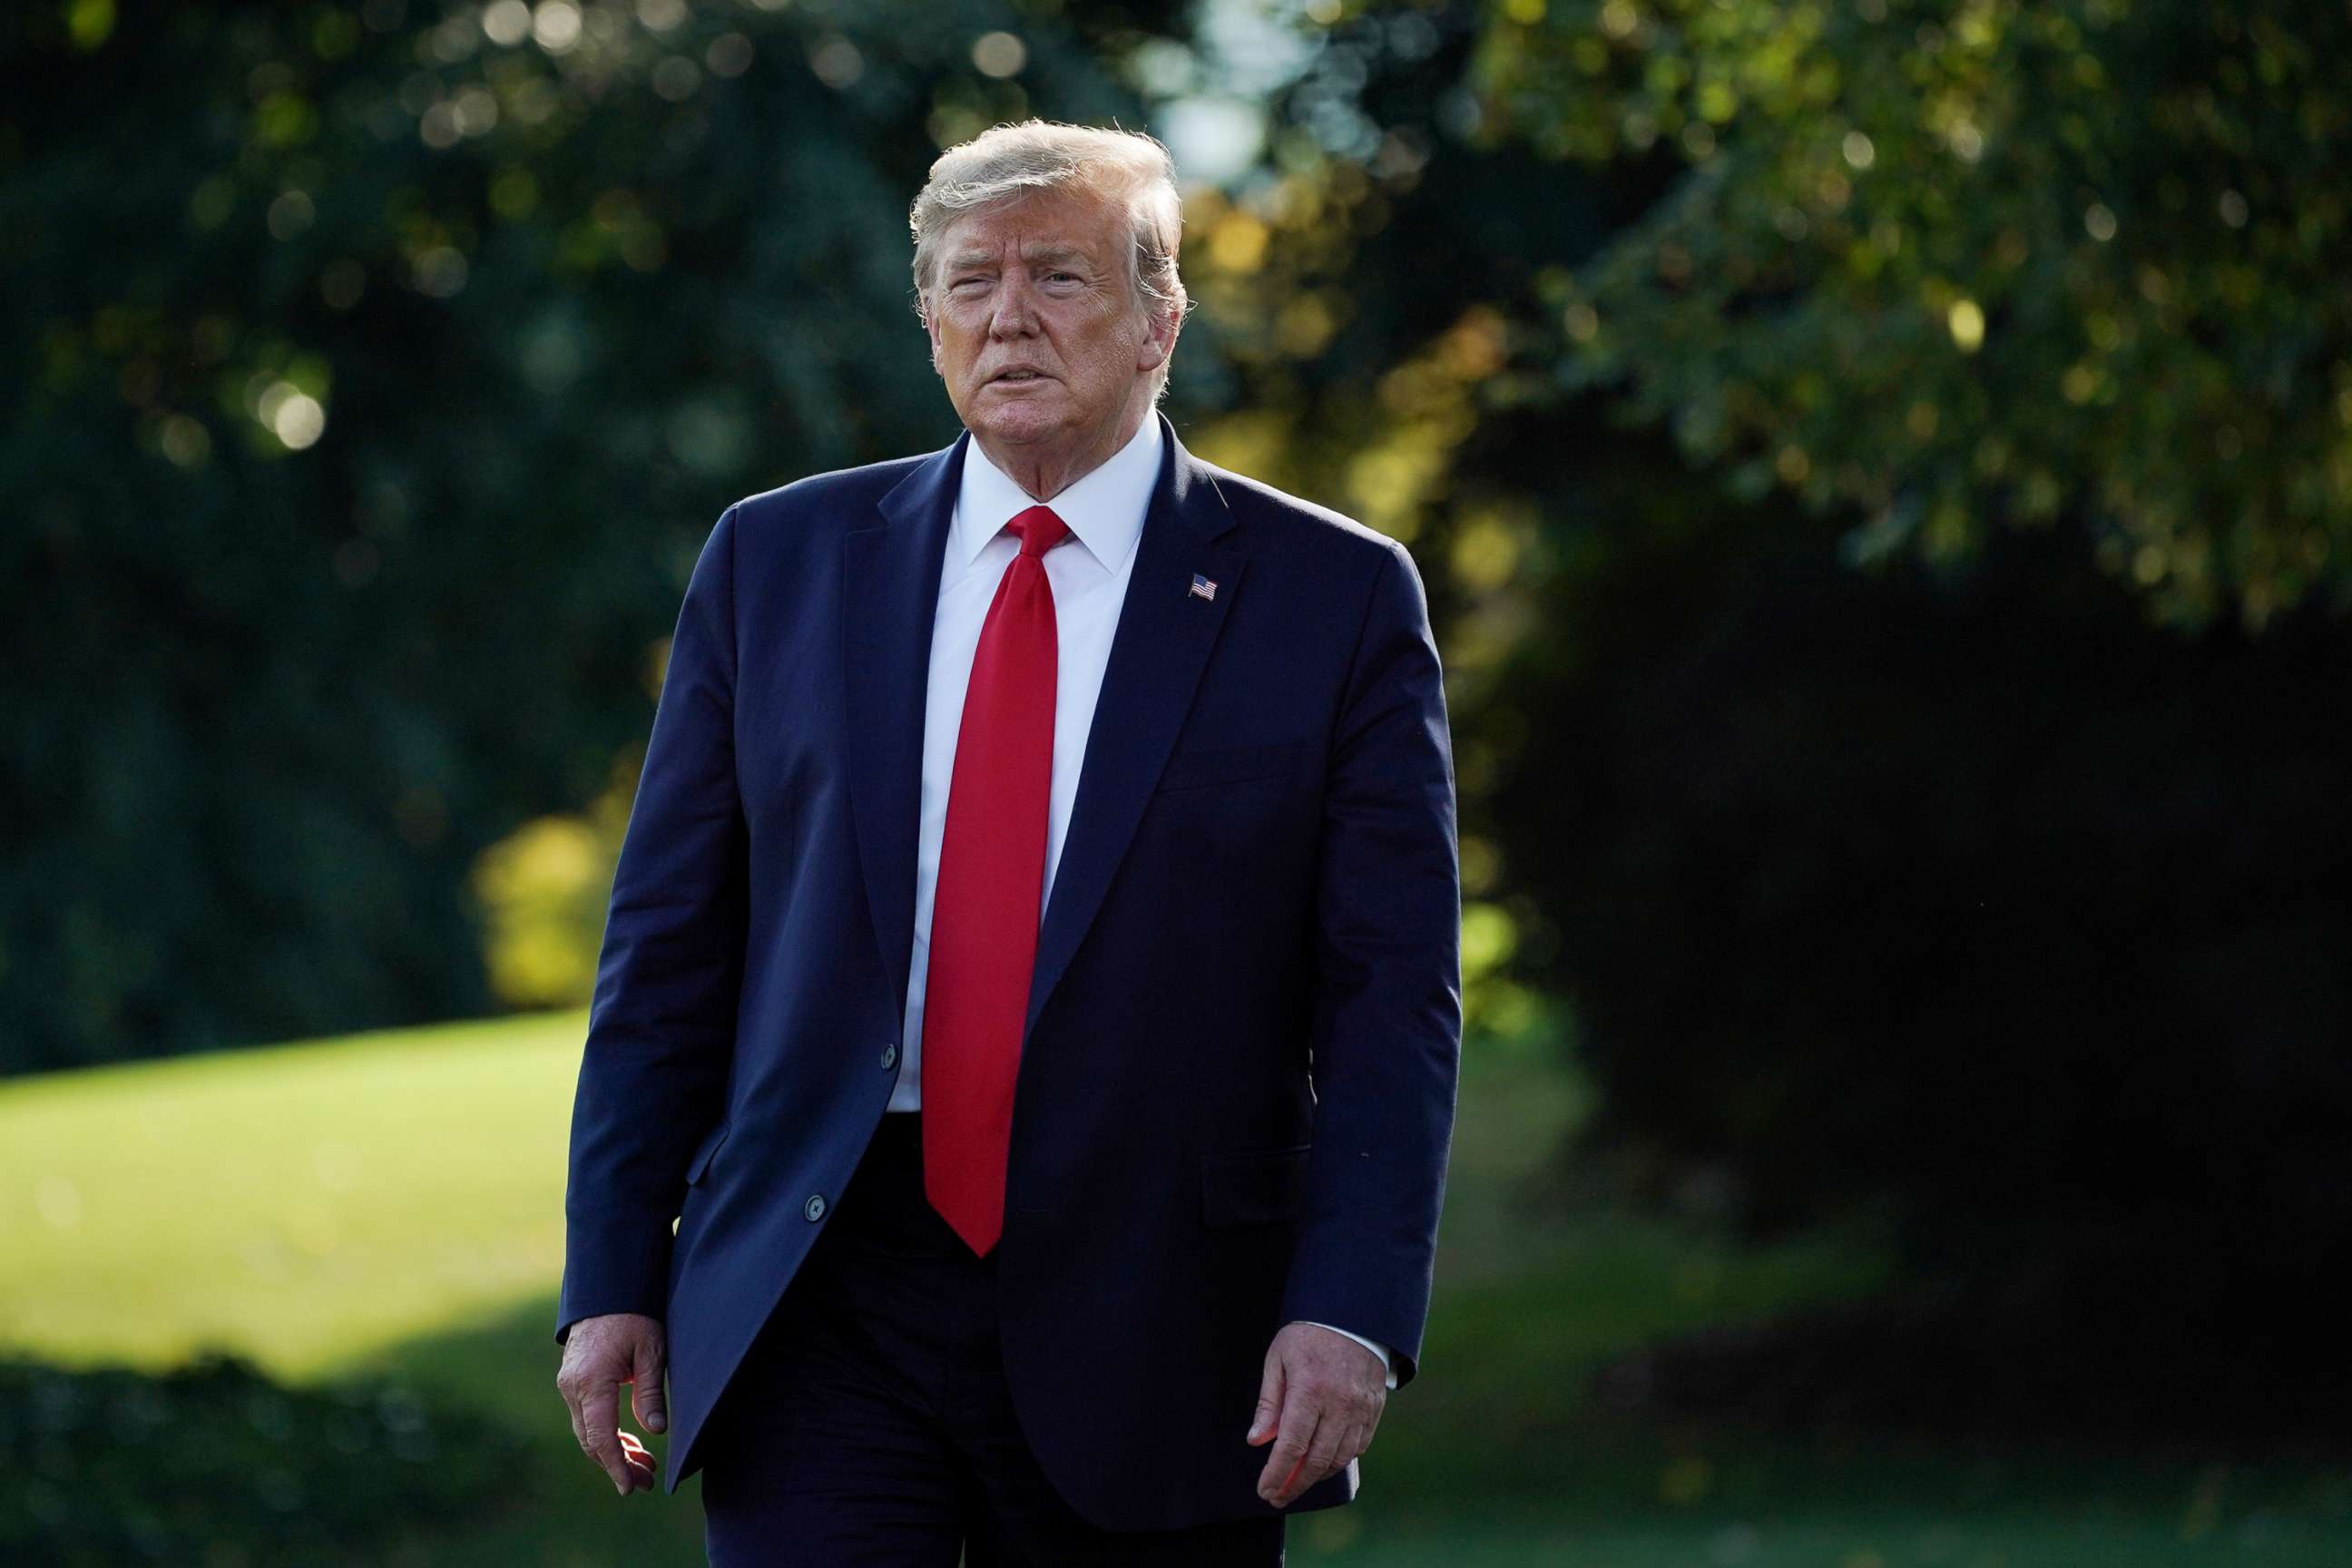 PHOTO: President Donald Trump walks across the South Lawn of the White House, Sept. 16, 2019.